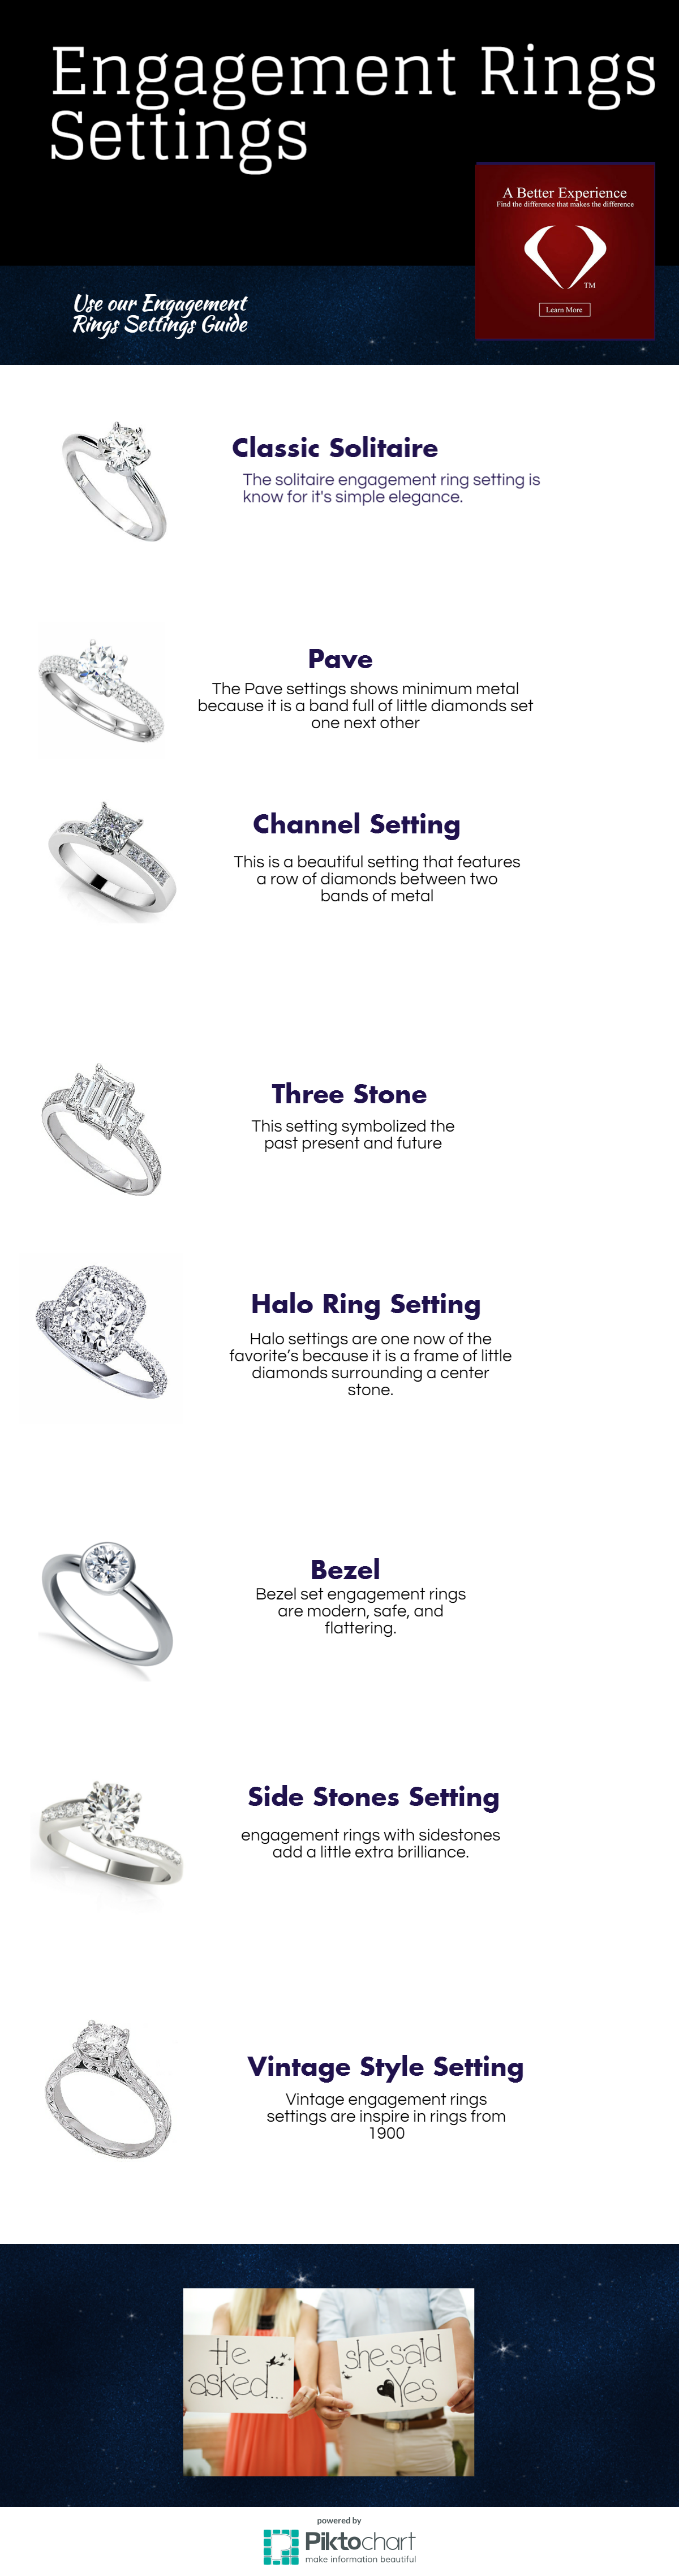 Infographic: engagement rings settings 